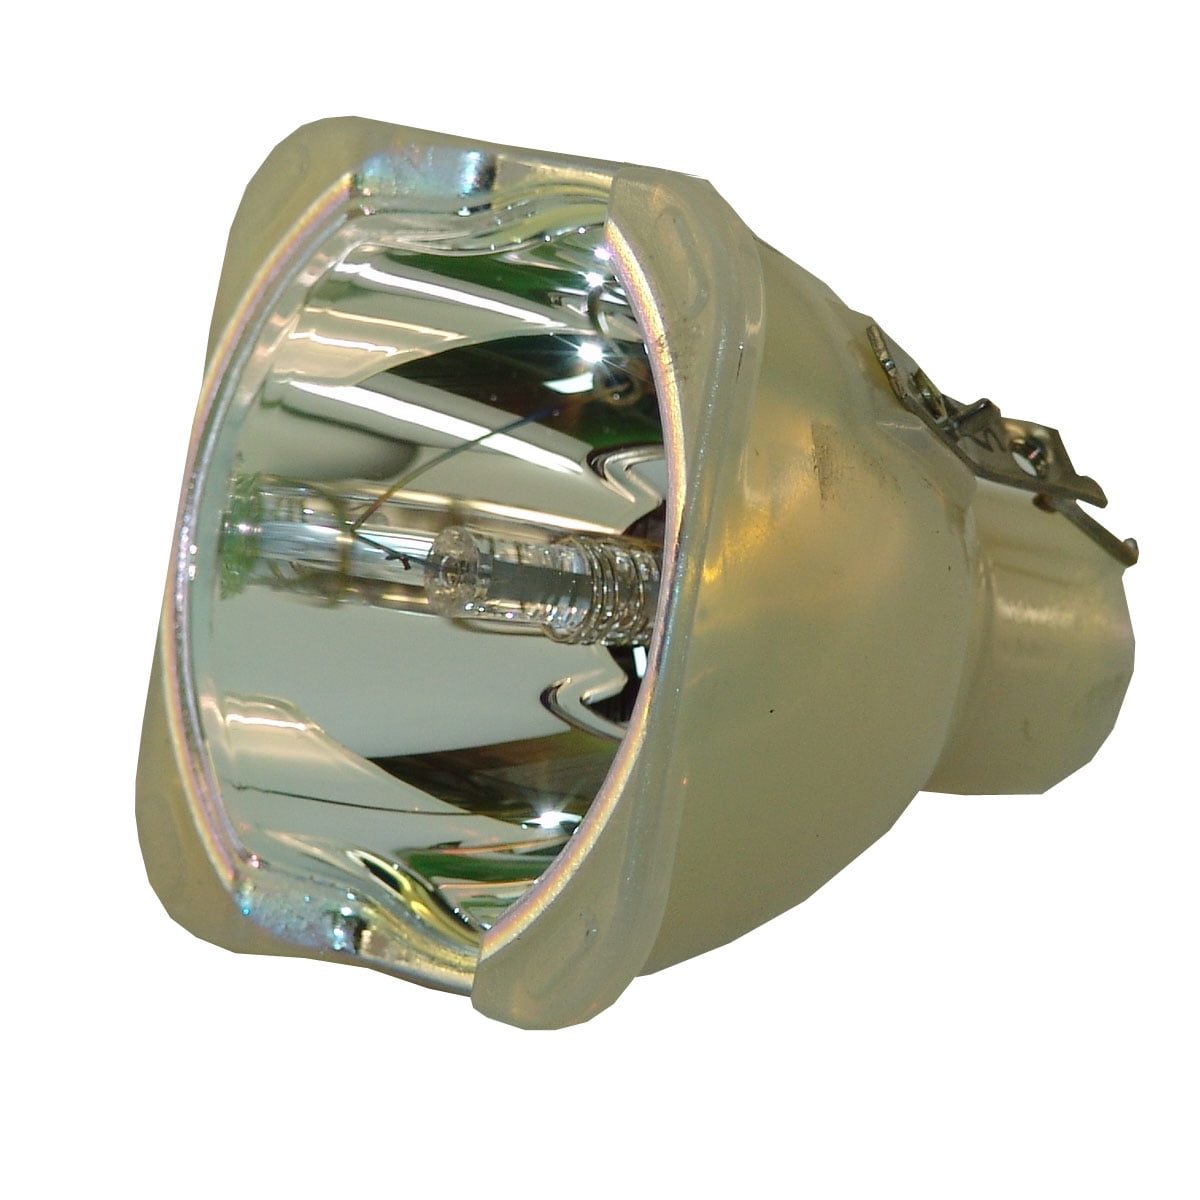 Original Philips Projector Lamp Replacement for BenQ (Bulb Only) Walmart.com